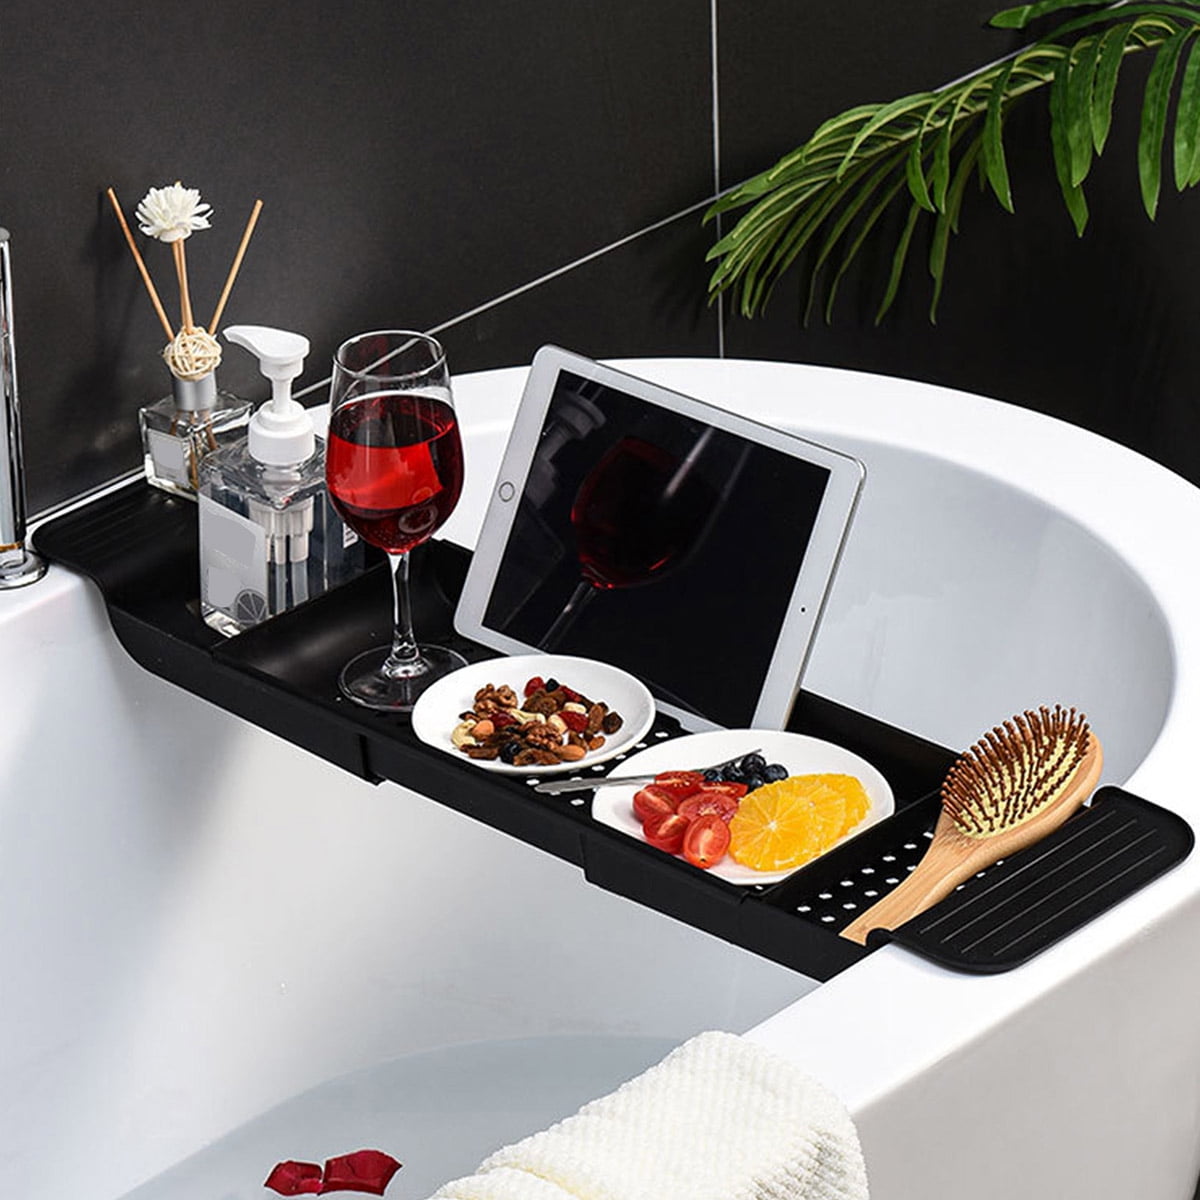 Bath Caddy Wood Wooden Board Rack Luxury Over Bathtub Shelf with Ipad Pro Safe and Secure Bamboo Bathroom Tray With Wine Holder Glass of wine or Tea Holders Book Kindle Perfect Gift 